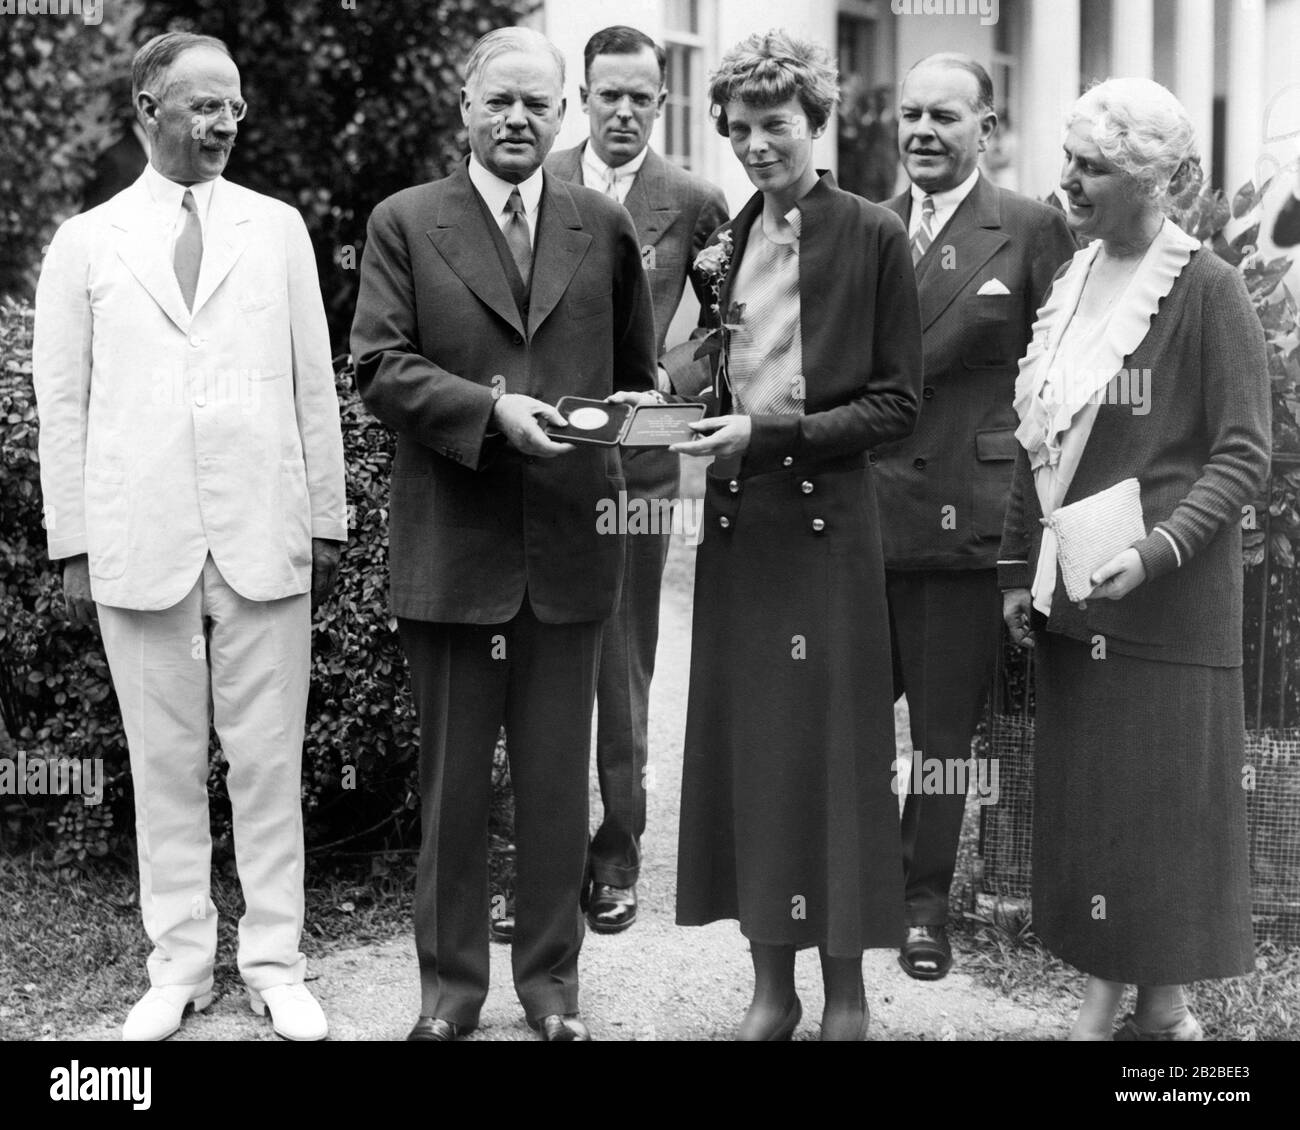 Amelia Earhart receives a gold medal from J. Edgar Hoover for her transatlantic flight. With her in the White House are (left to right): Dr. Gilbert Grosvenor, Präsident Hoover, George Palmer Putnam, Amelia Earhart, John O. La Gorce and Mrs. Hoover. Stock Photo